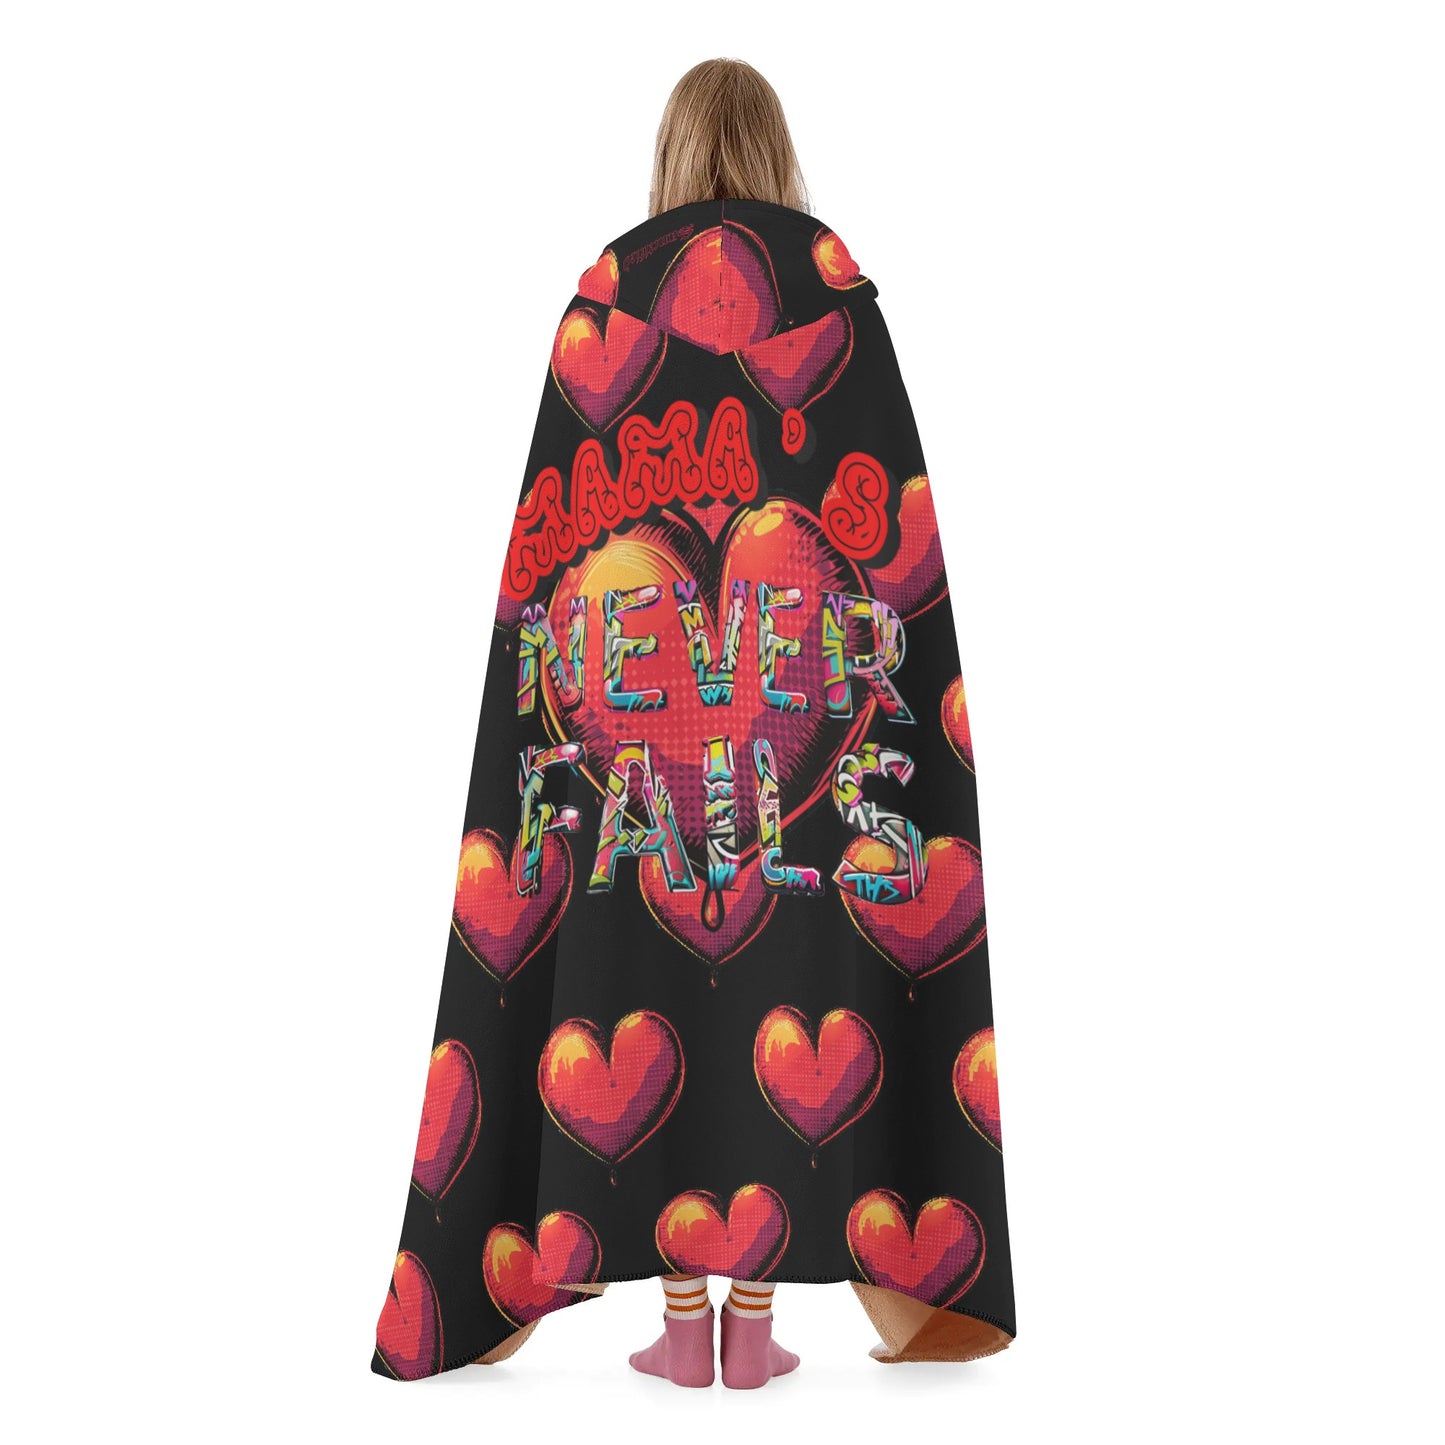 Mamas Love Never Fails- Hooded Blanket, Free Shipping